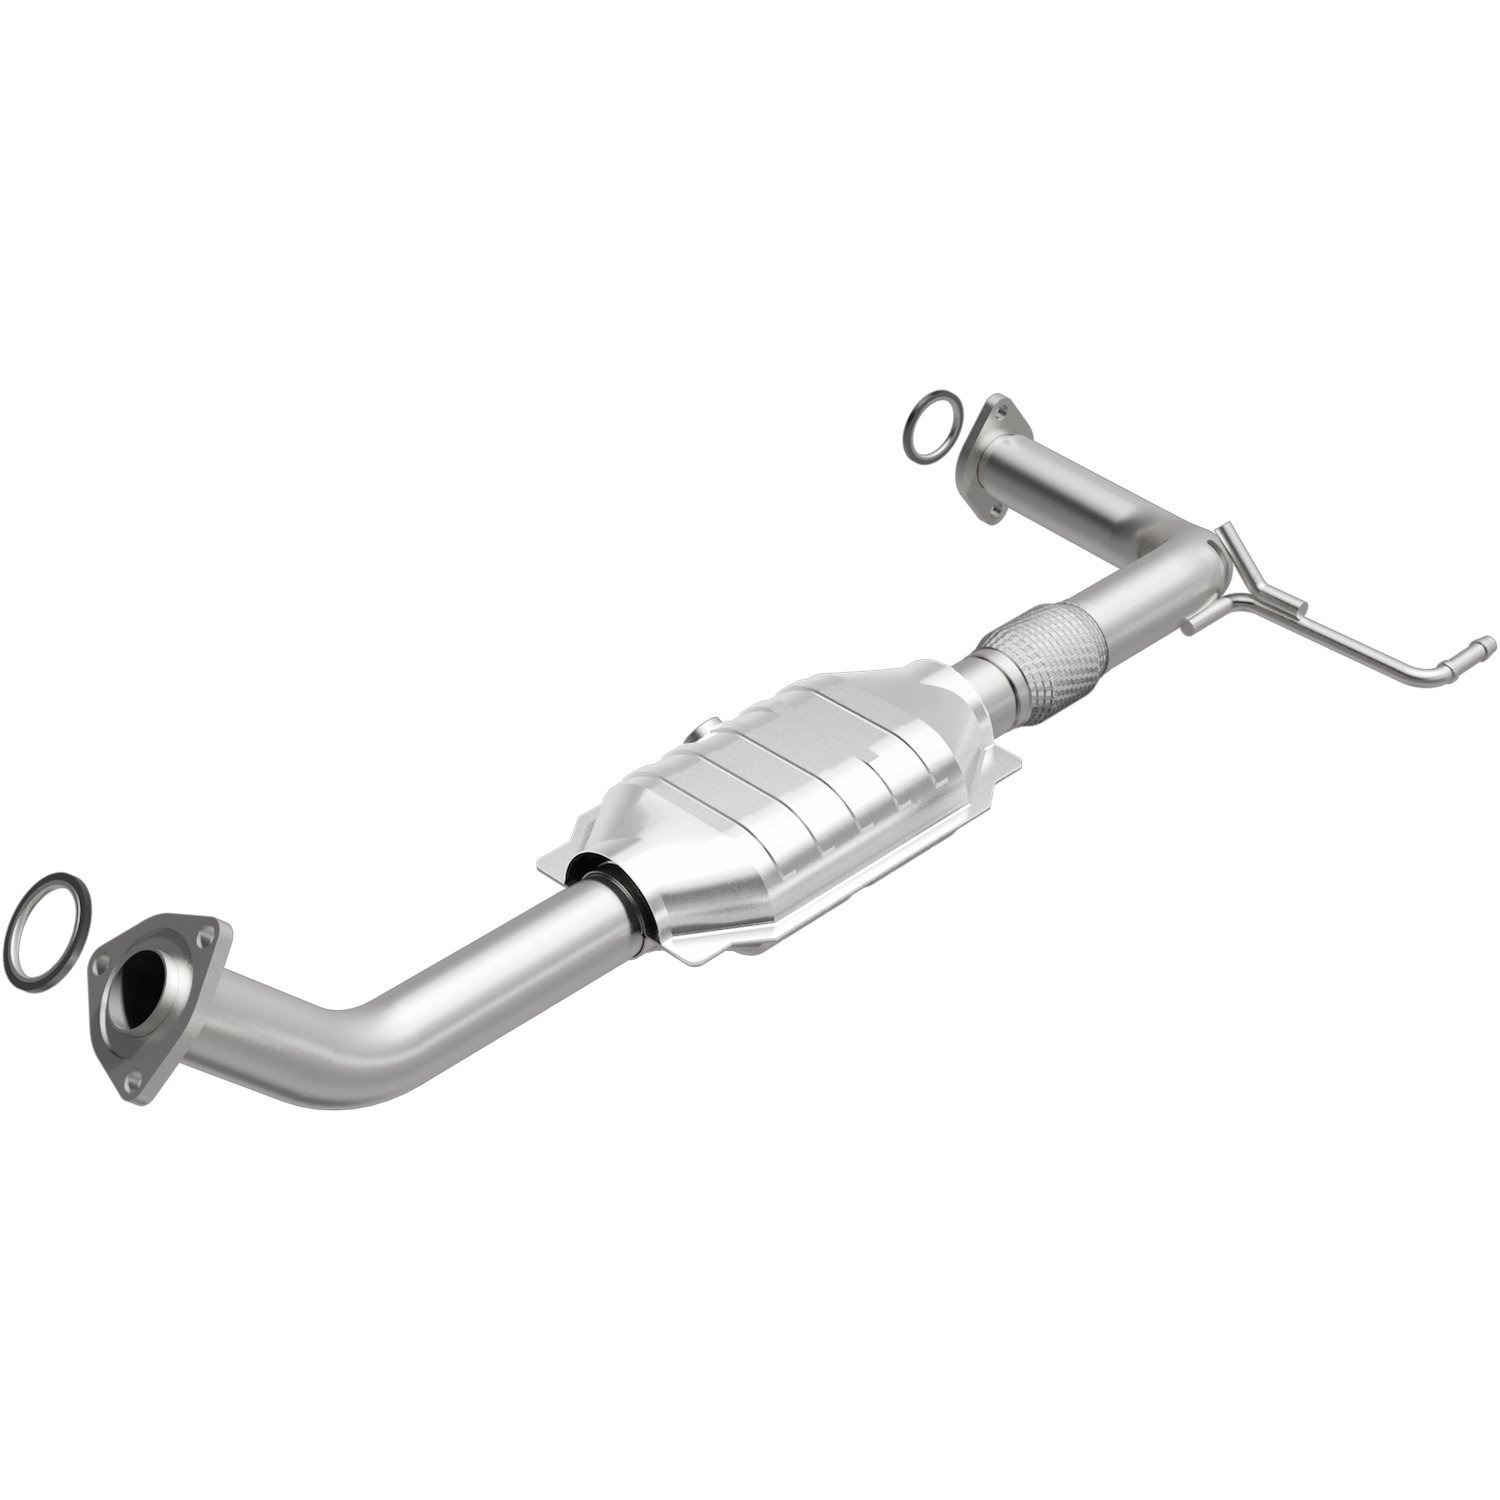 2005-2006 Toyota Tundra OEM Grade Federal / EPA Compliant Direct-Fit Catalytic Converter